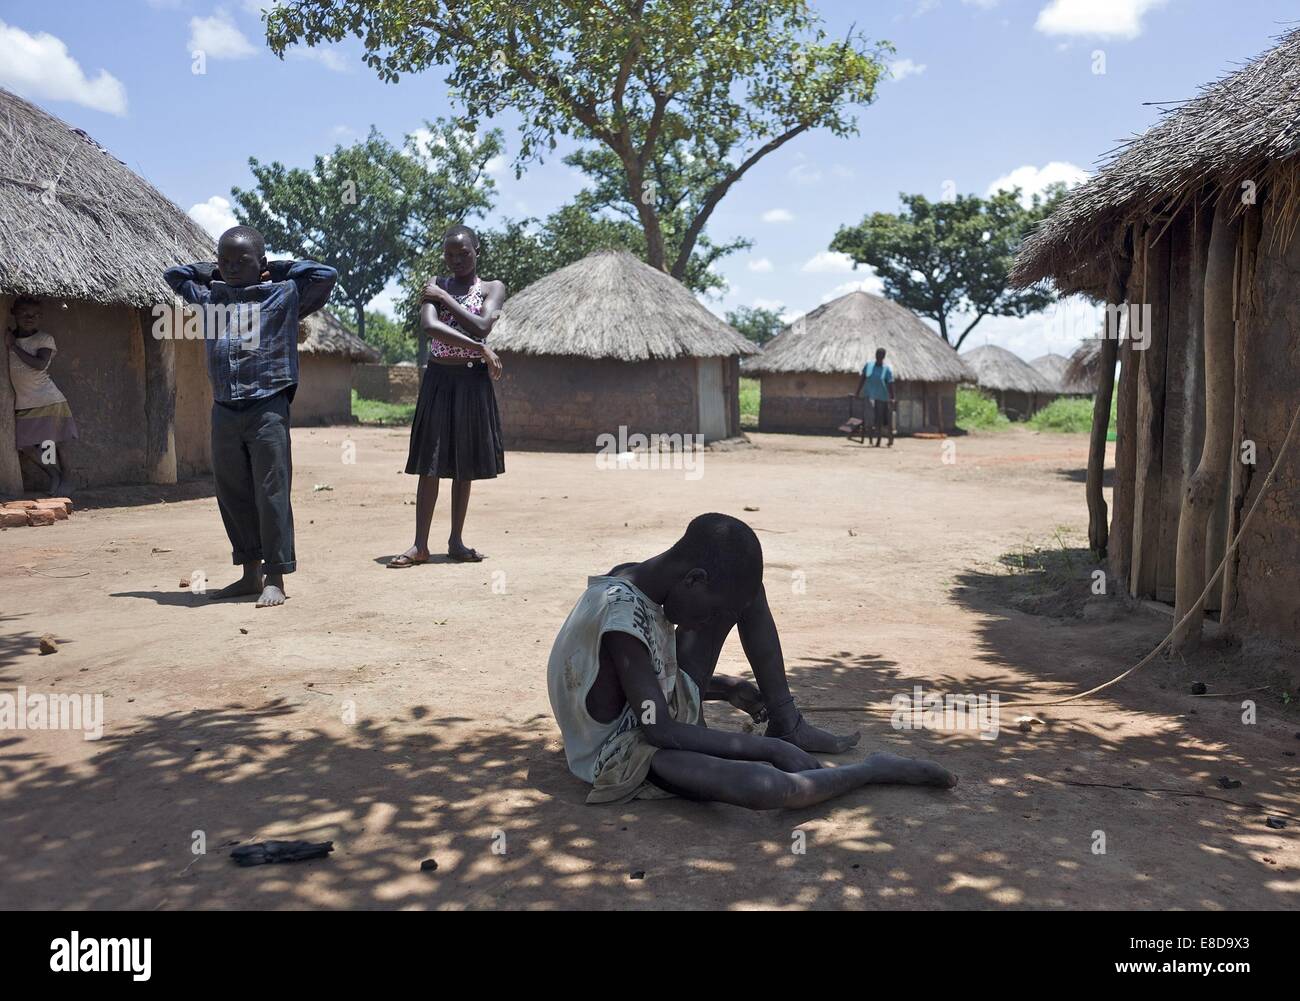 Sept. 13, 2014 - Kampala, Kampala, Uganda - September 13, 2014 - Lapul - Ocwida village (Pader district), Uganda - Nodding Syndrome patient Okot David, 18, sits outside his hut as a younger brother and sister wait for another sibling, so that they can walk to their school district some three hours away. The school season is about to begin so they will stay at the family's other home which is closer to the school. Their brother represents a severe case of Nodding Syndrome; he has been ill with it since 2003. Okot is one of seven children and the only one with the illness. He's tied to his livin Stock Photo